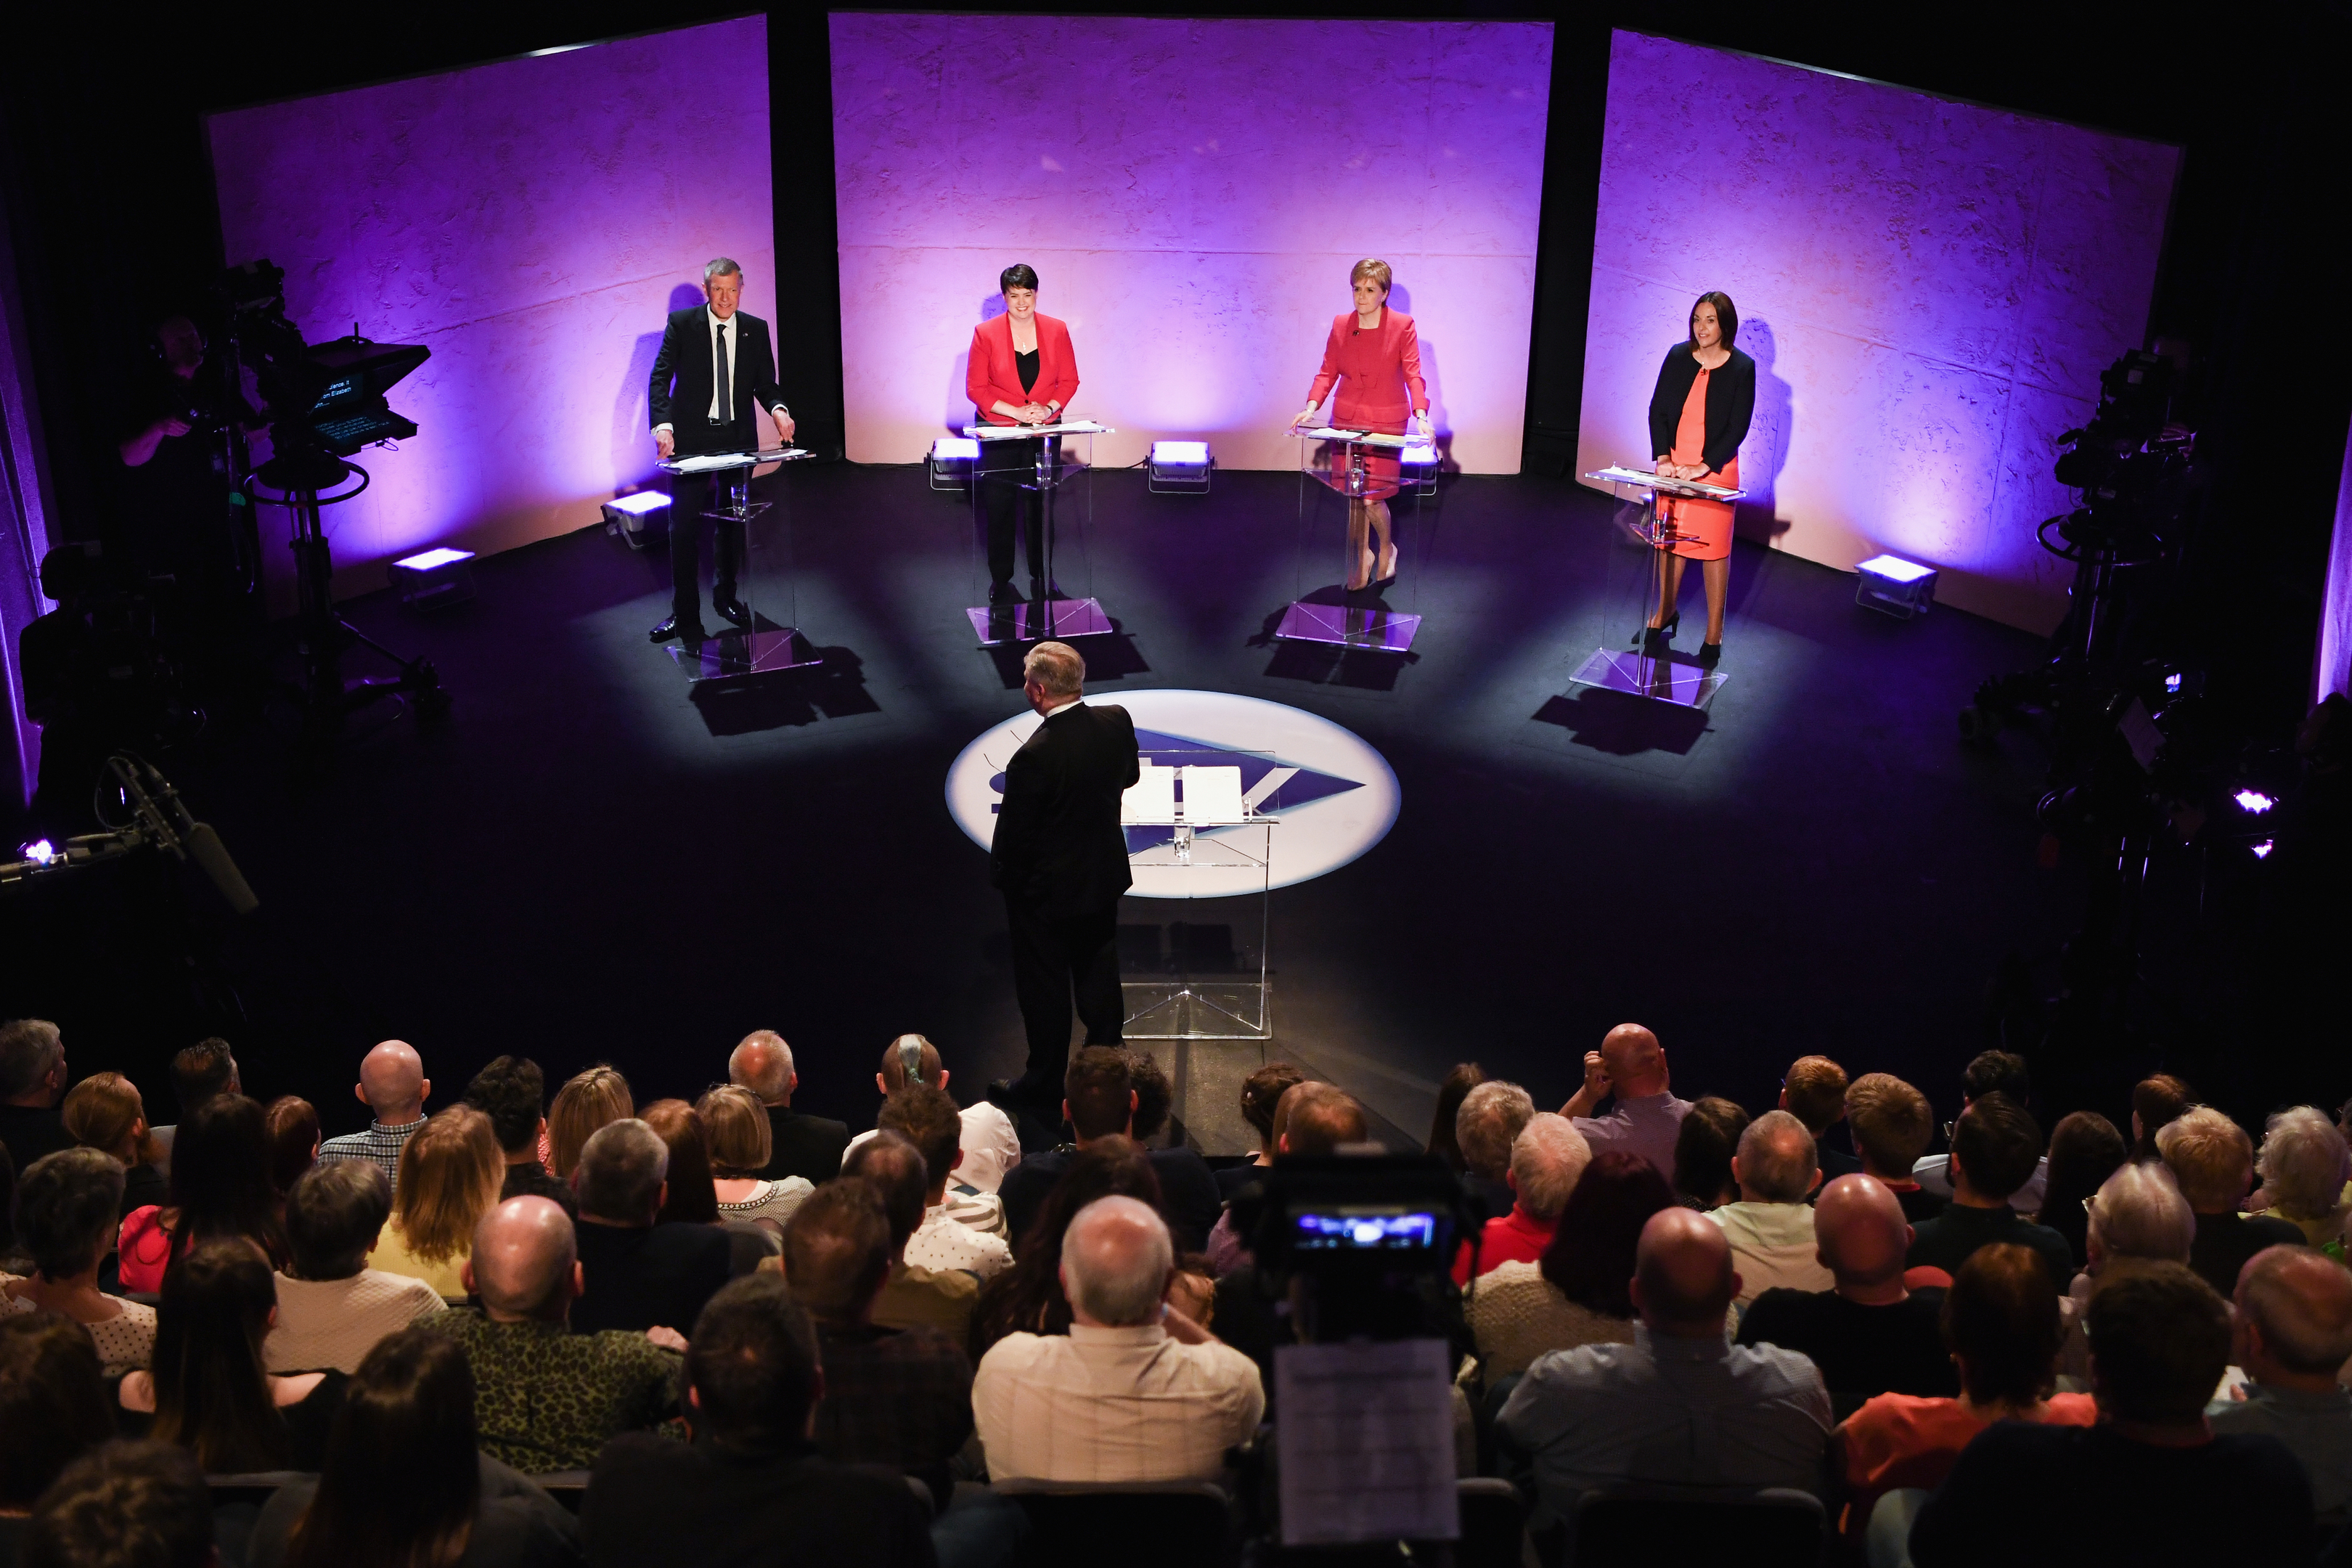 Scottish Liberal Democrat leader Willie Rennie, Scottish Conservative Party leader Ruth Davidson, Nicola Sturgeon, leader of the SNP and Labour leader Kezia Dugdale during STV General Election leaders debate (Jeff J Mitchell/Getty Images)